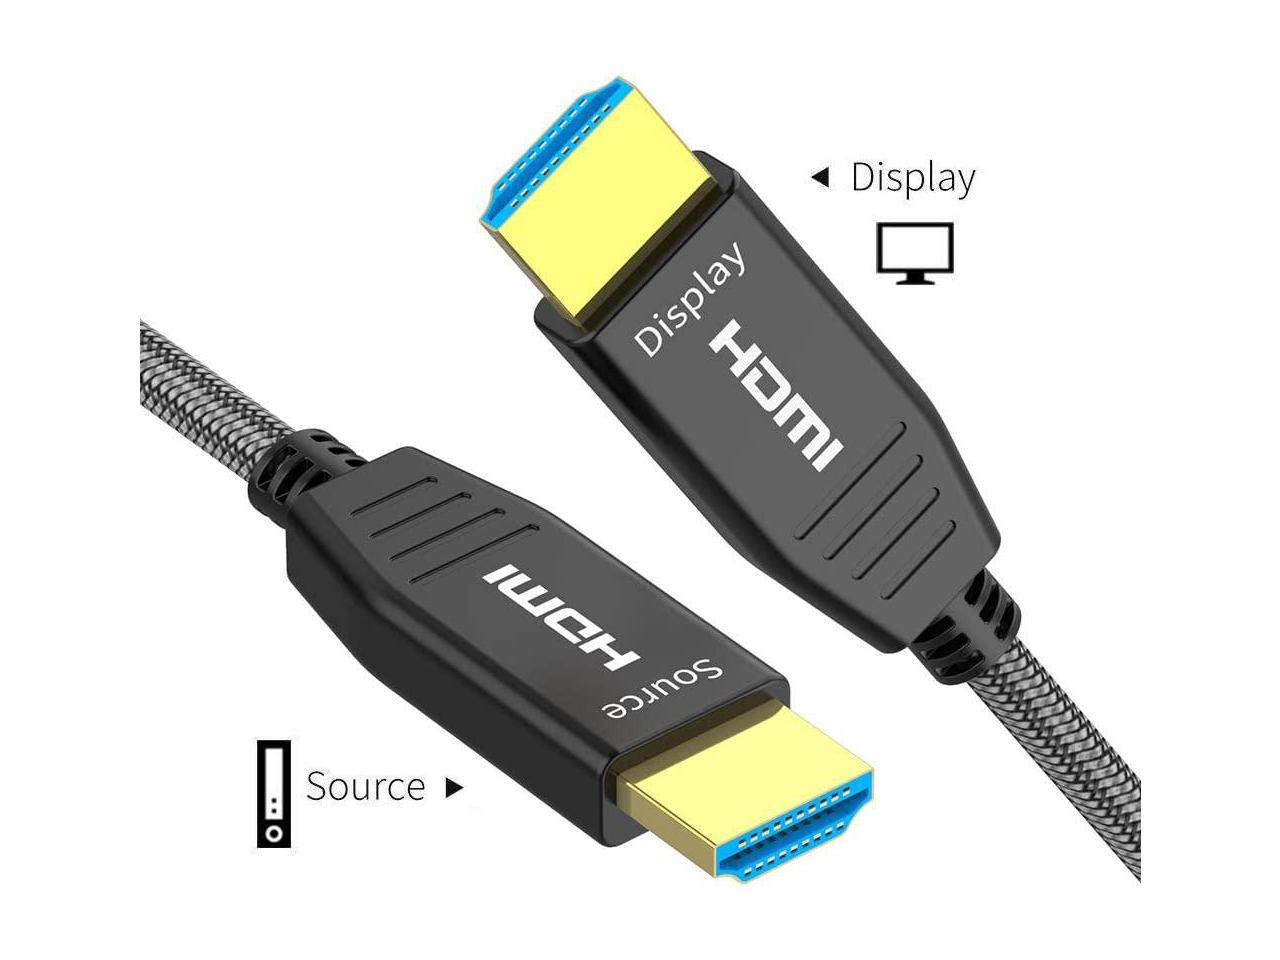 HDMI Fiber Optic Cable for Tablet PC 328 feet High Speed Support 18.2 Gbps 4K at 60Hz HDMI 2.0b Subsampling 4:4:4/4:2:2/4:2:0 Slim and Flexible with Optic Technology 100m 